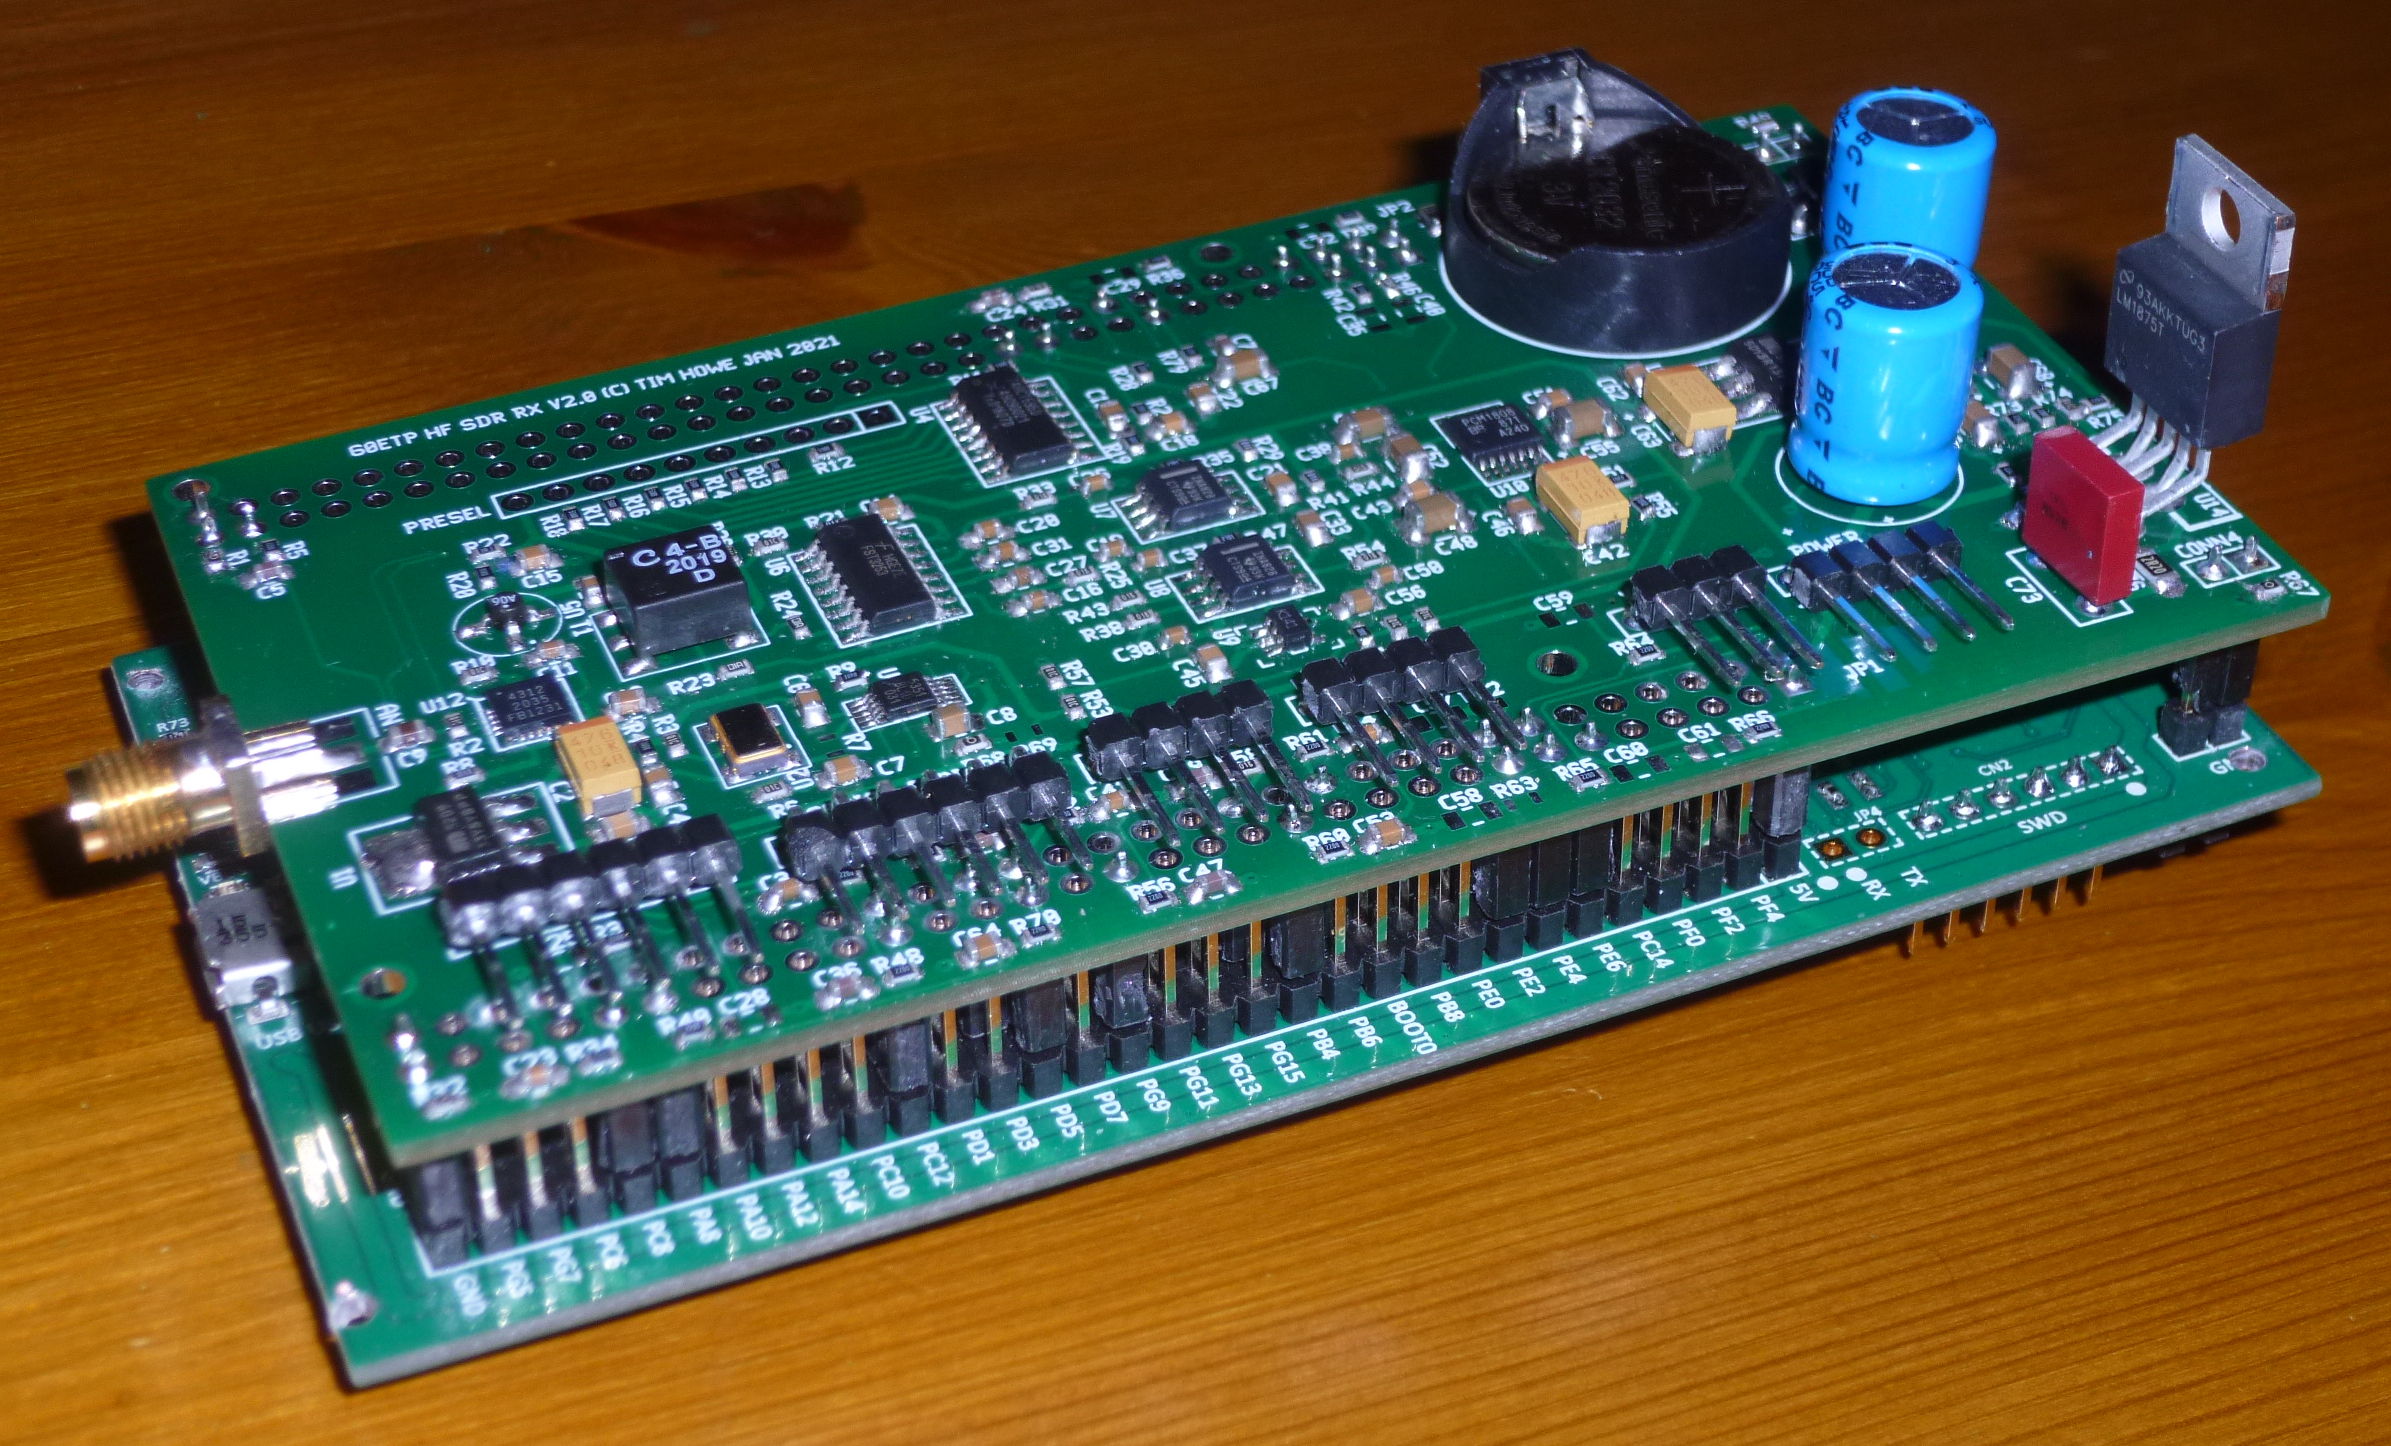 G0ETP V2 SDR Board connected to STM32F429I-DISC1 Discovery